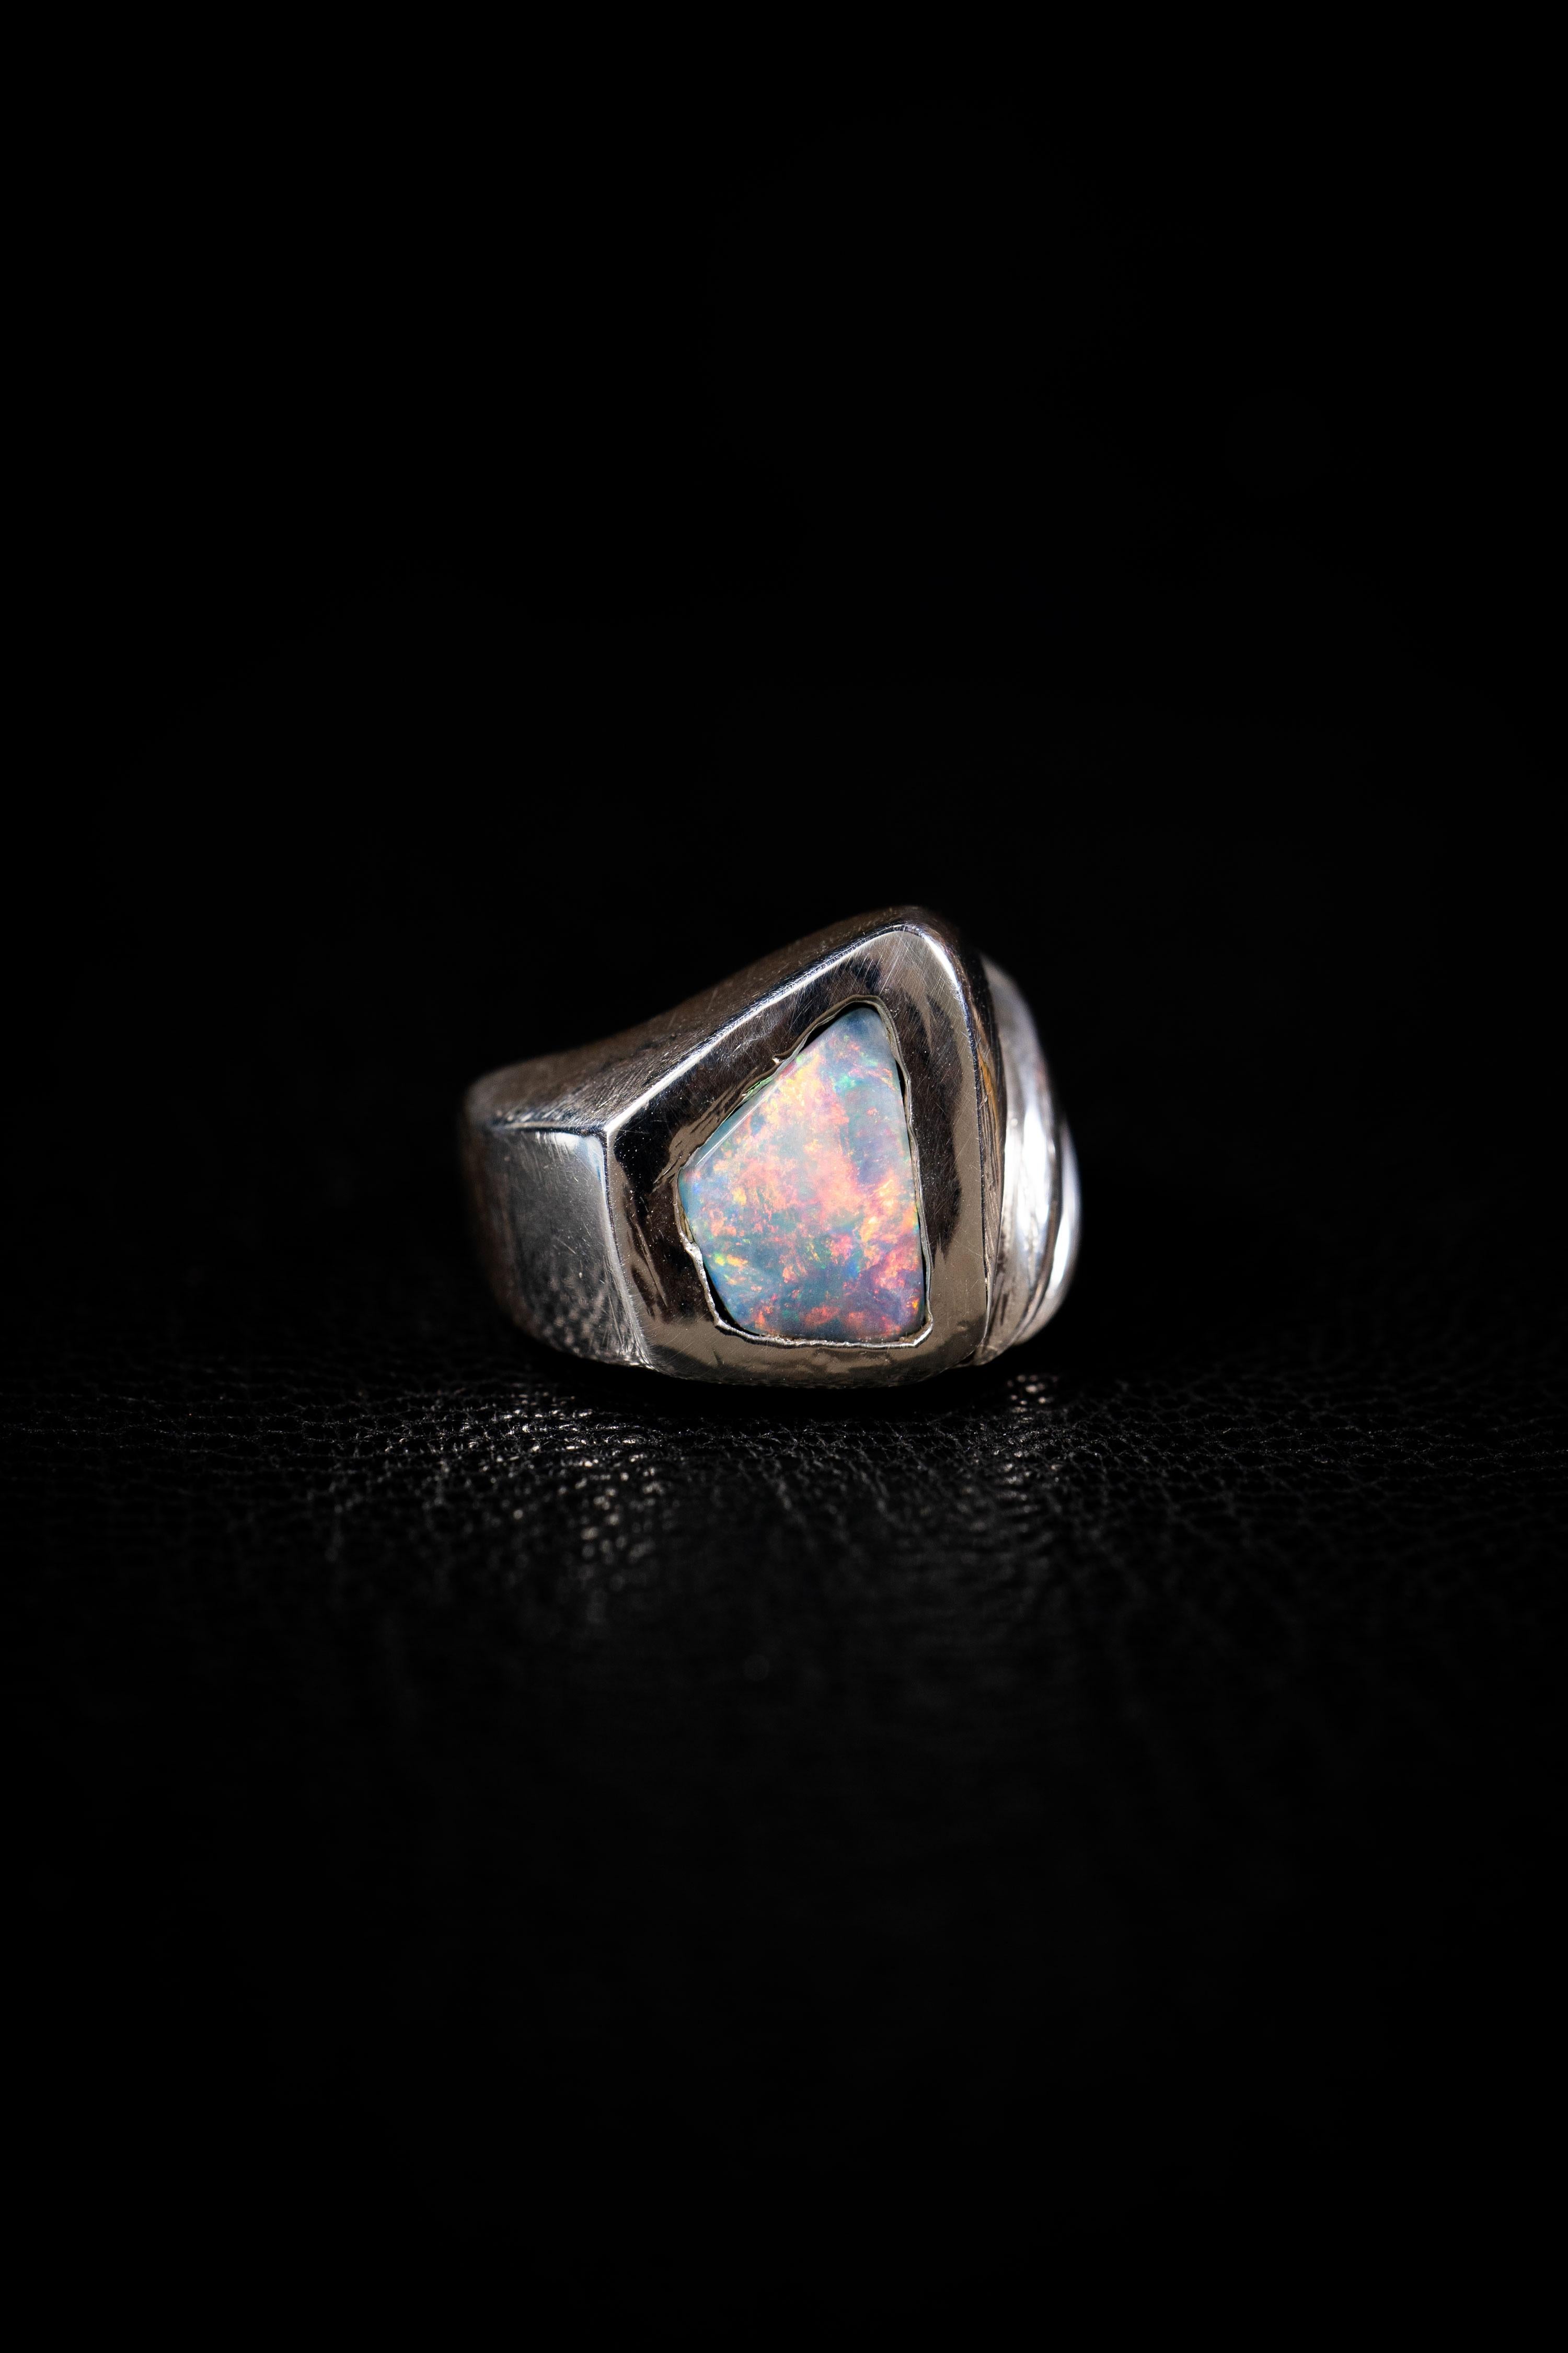 Through Dimensions is a one-of-a-kind ring by Ken Fury that is hand-carved and cast in sterling silver and features a rare genuine Australian opal doublet stone.

Ring Size: 9

Hand-signed